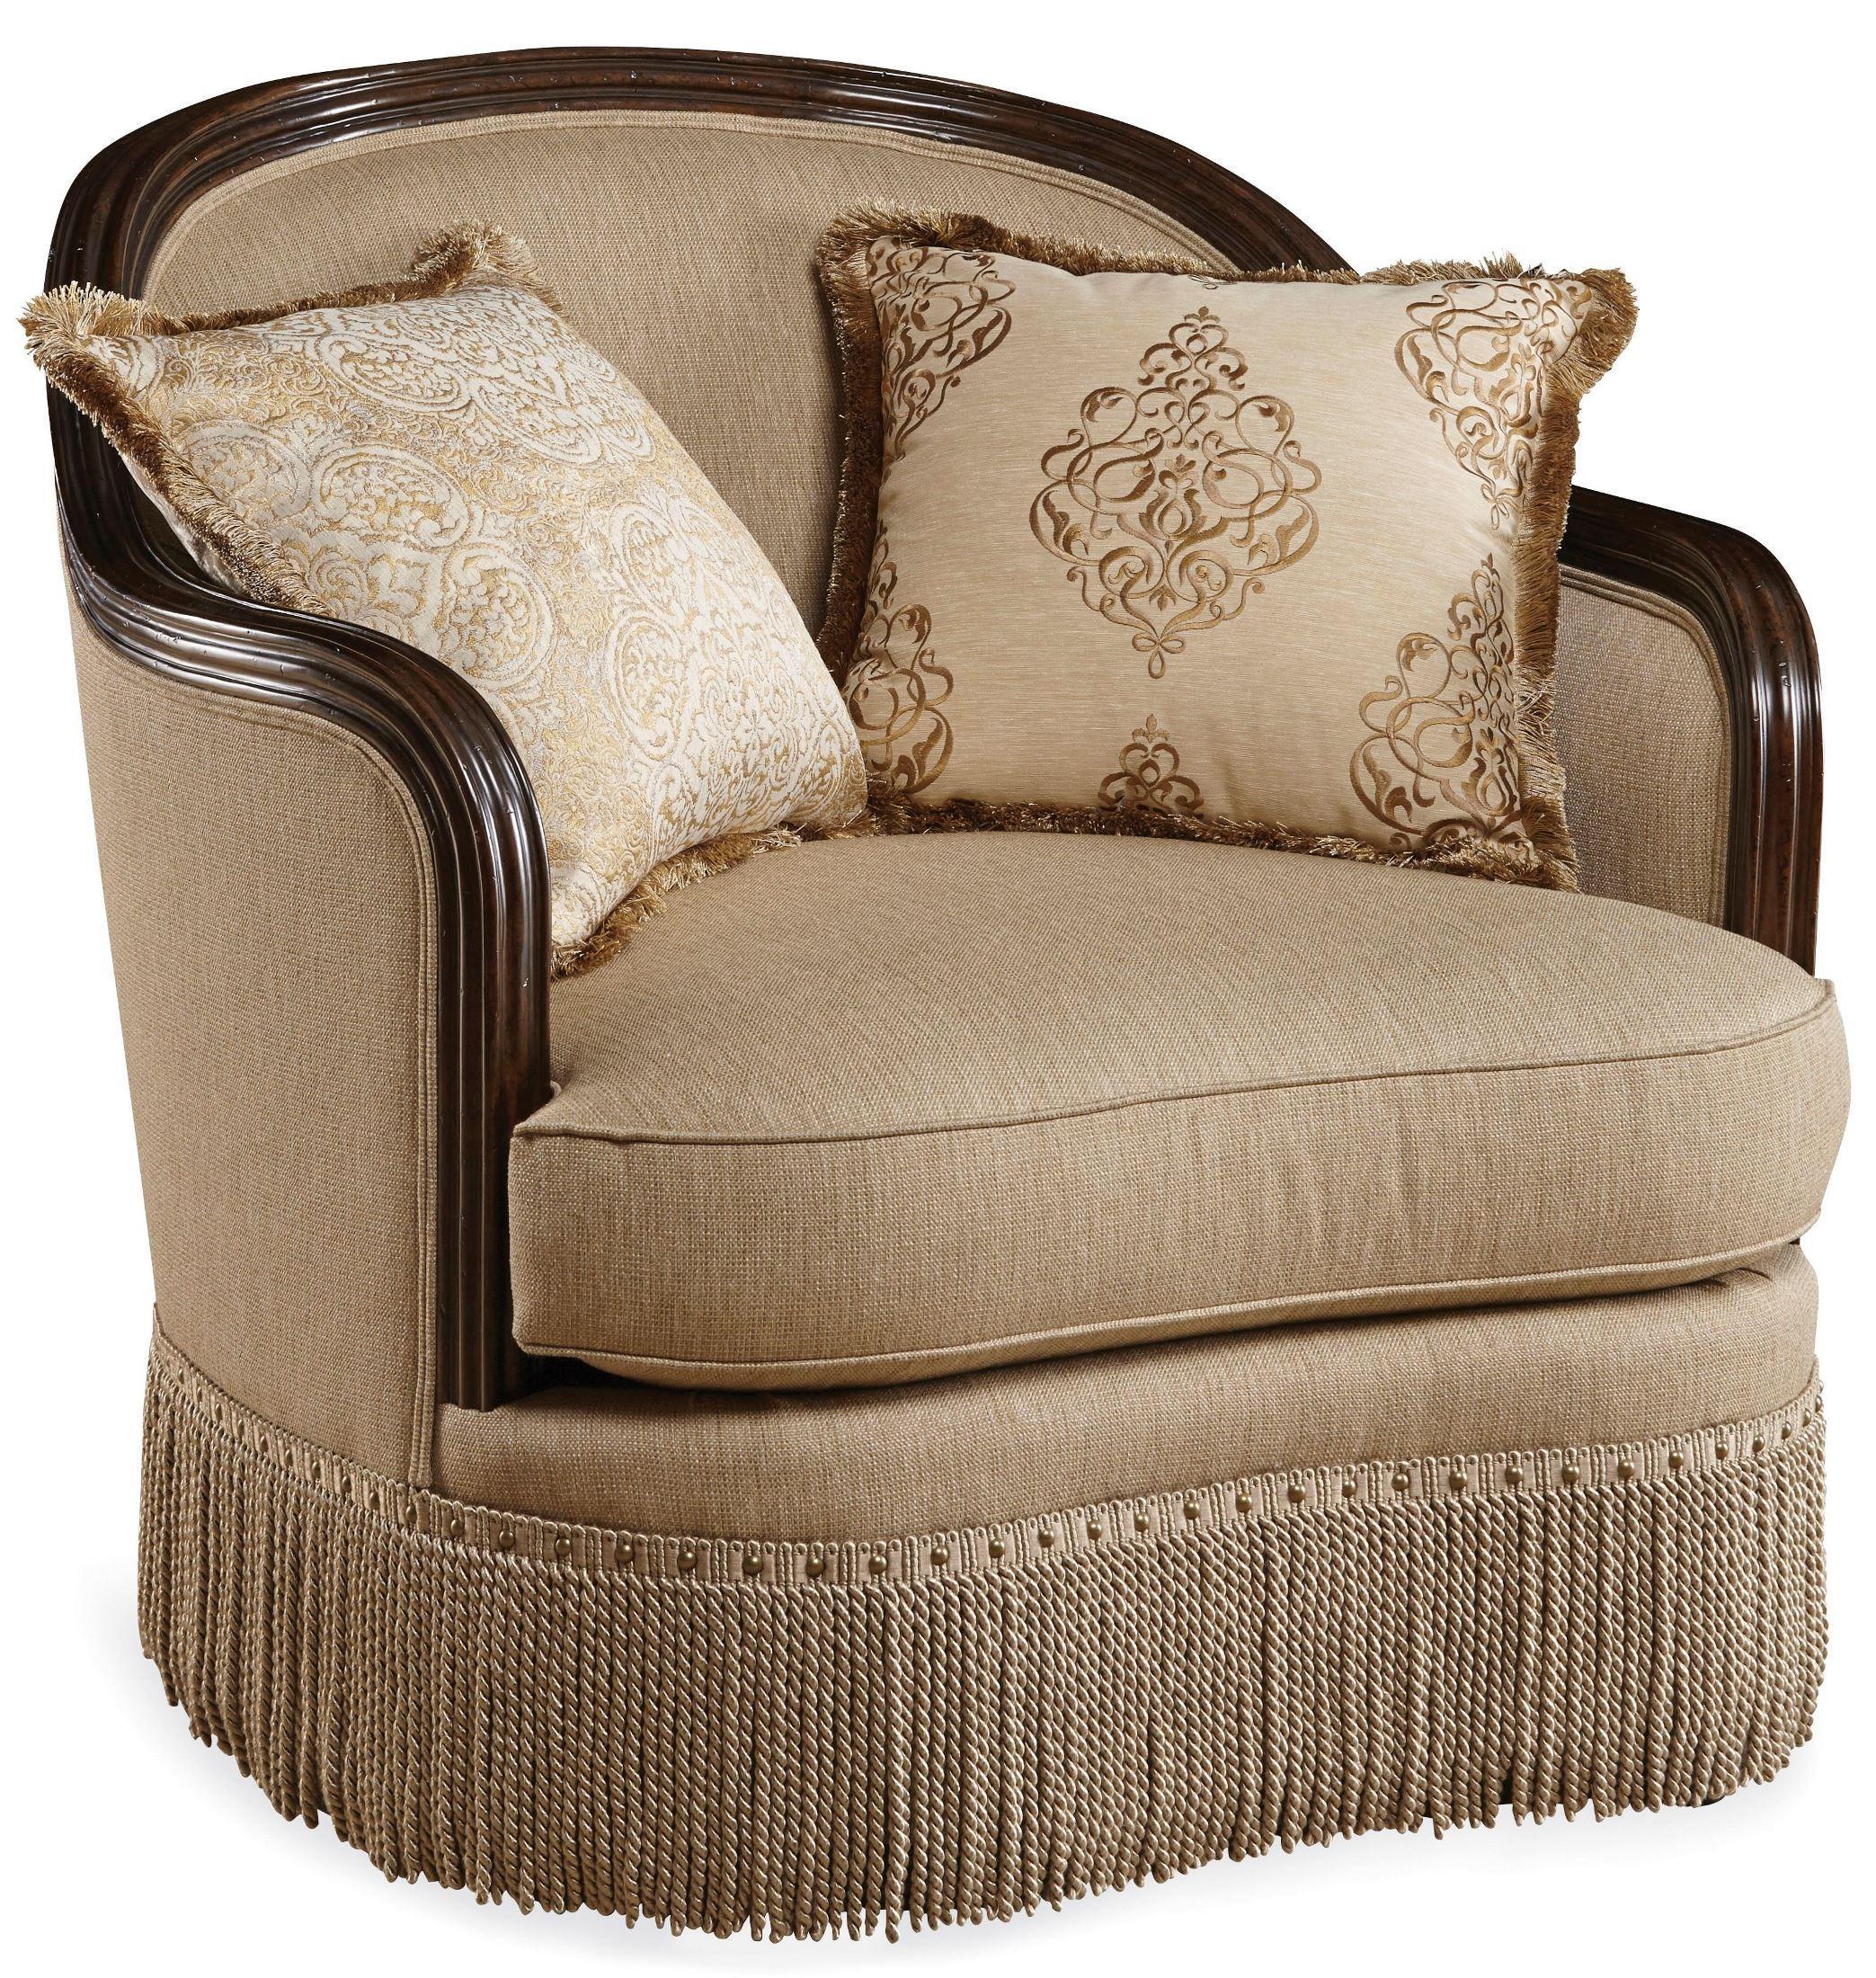 Contemporary Arm Chairs Giovanna 509503-5327AB in Beige Fabric